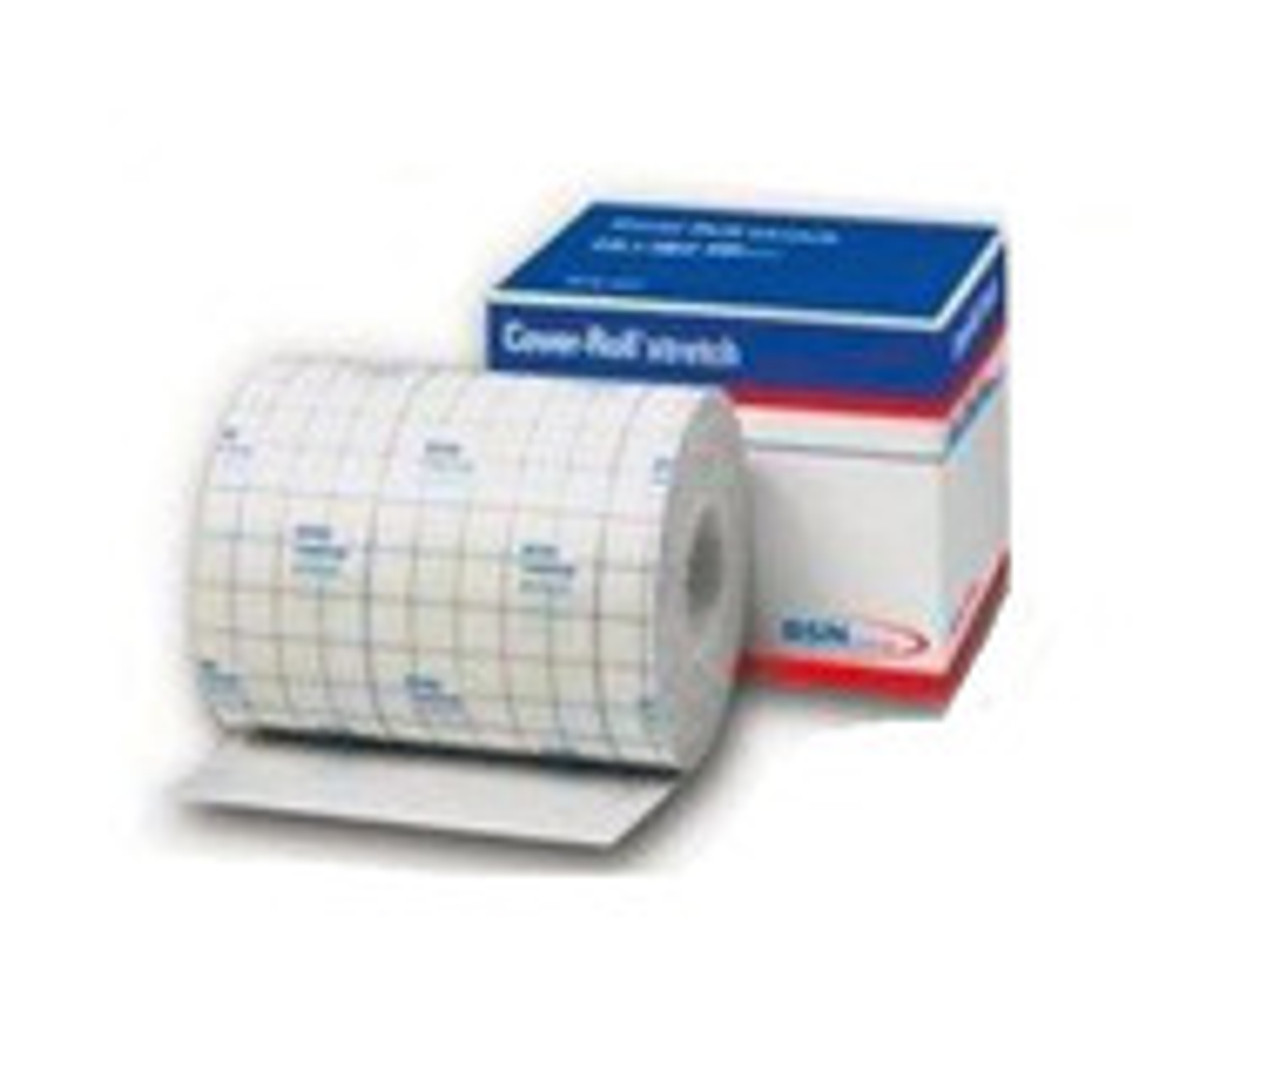 BSN-4555300 BX/1 COVER-ROLL STRETCH NON-WOVEN ADHESIVE FIXATION SHEET 10CM X 9.2M